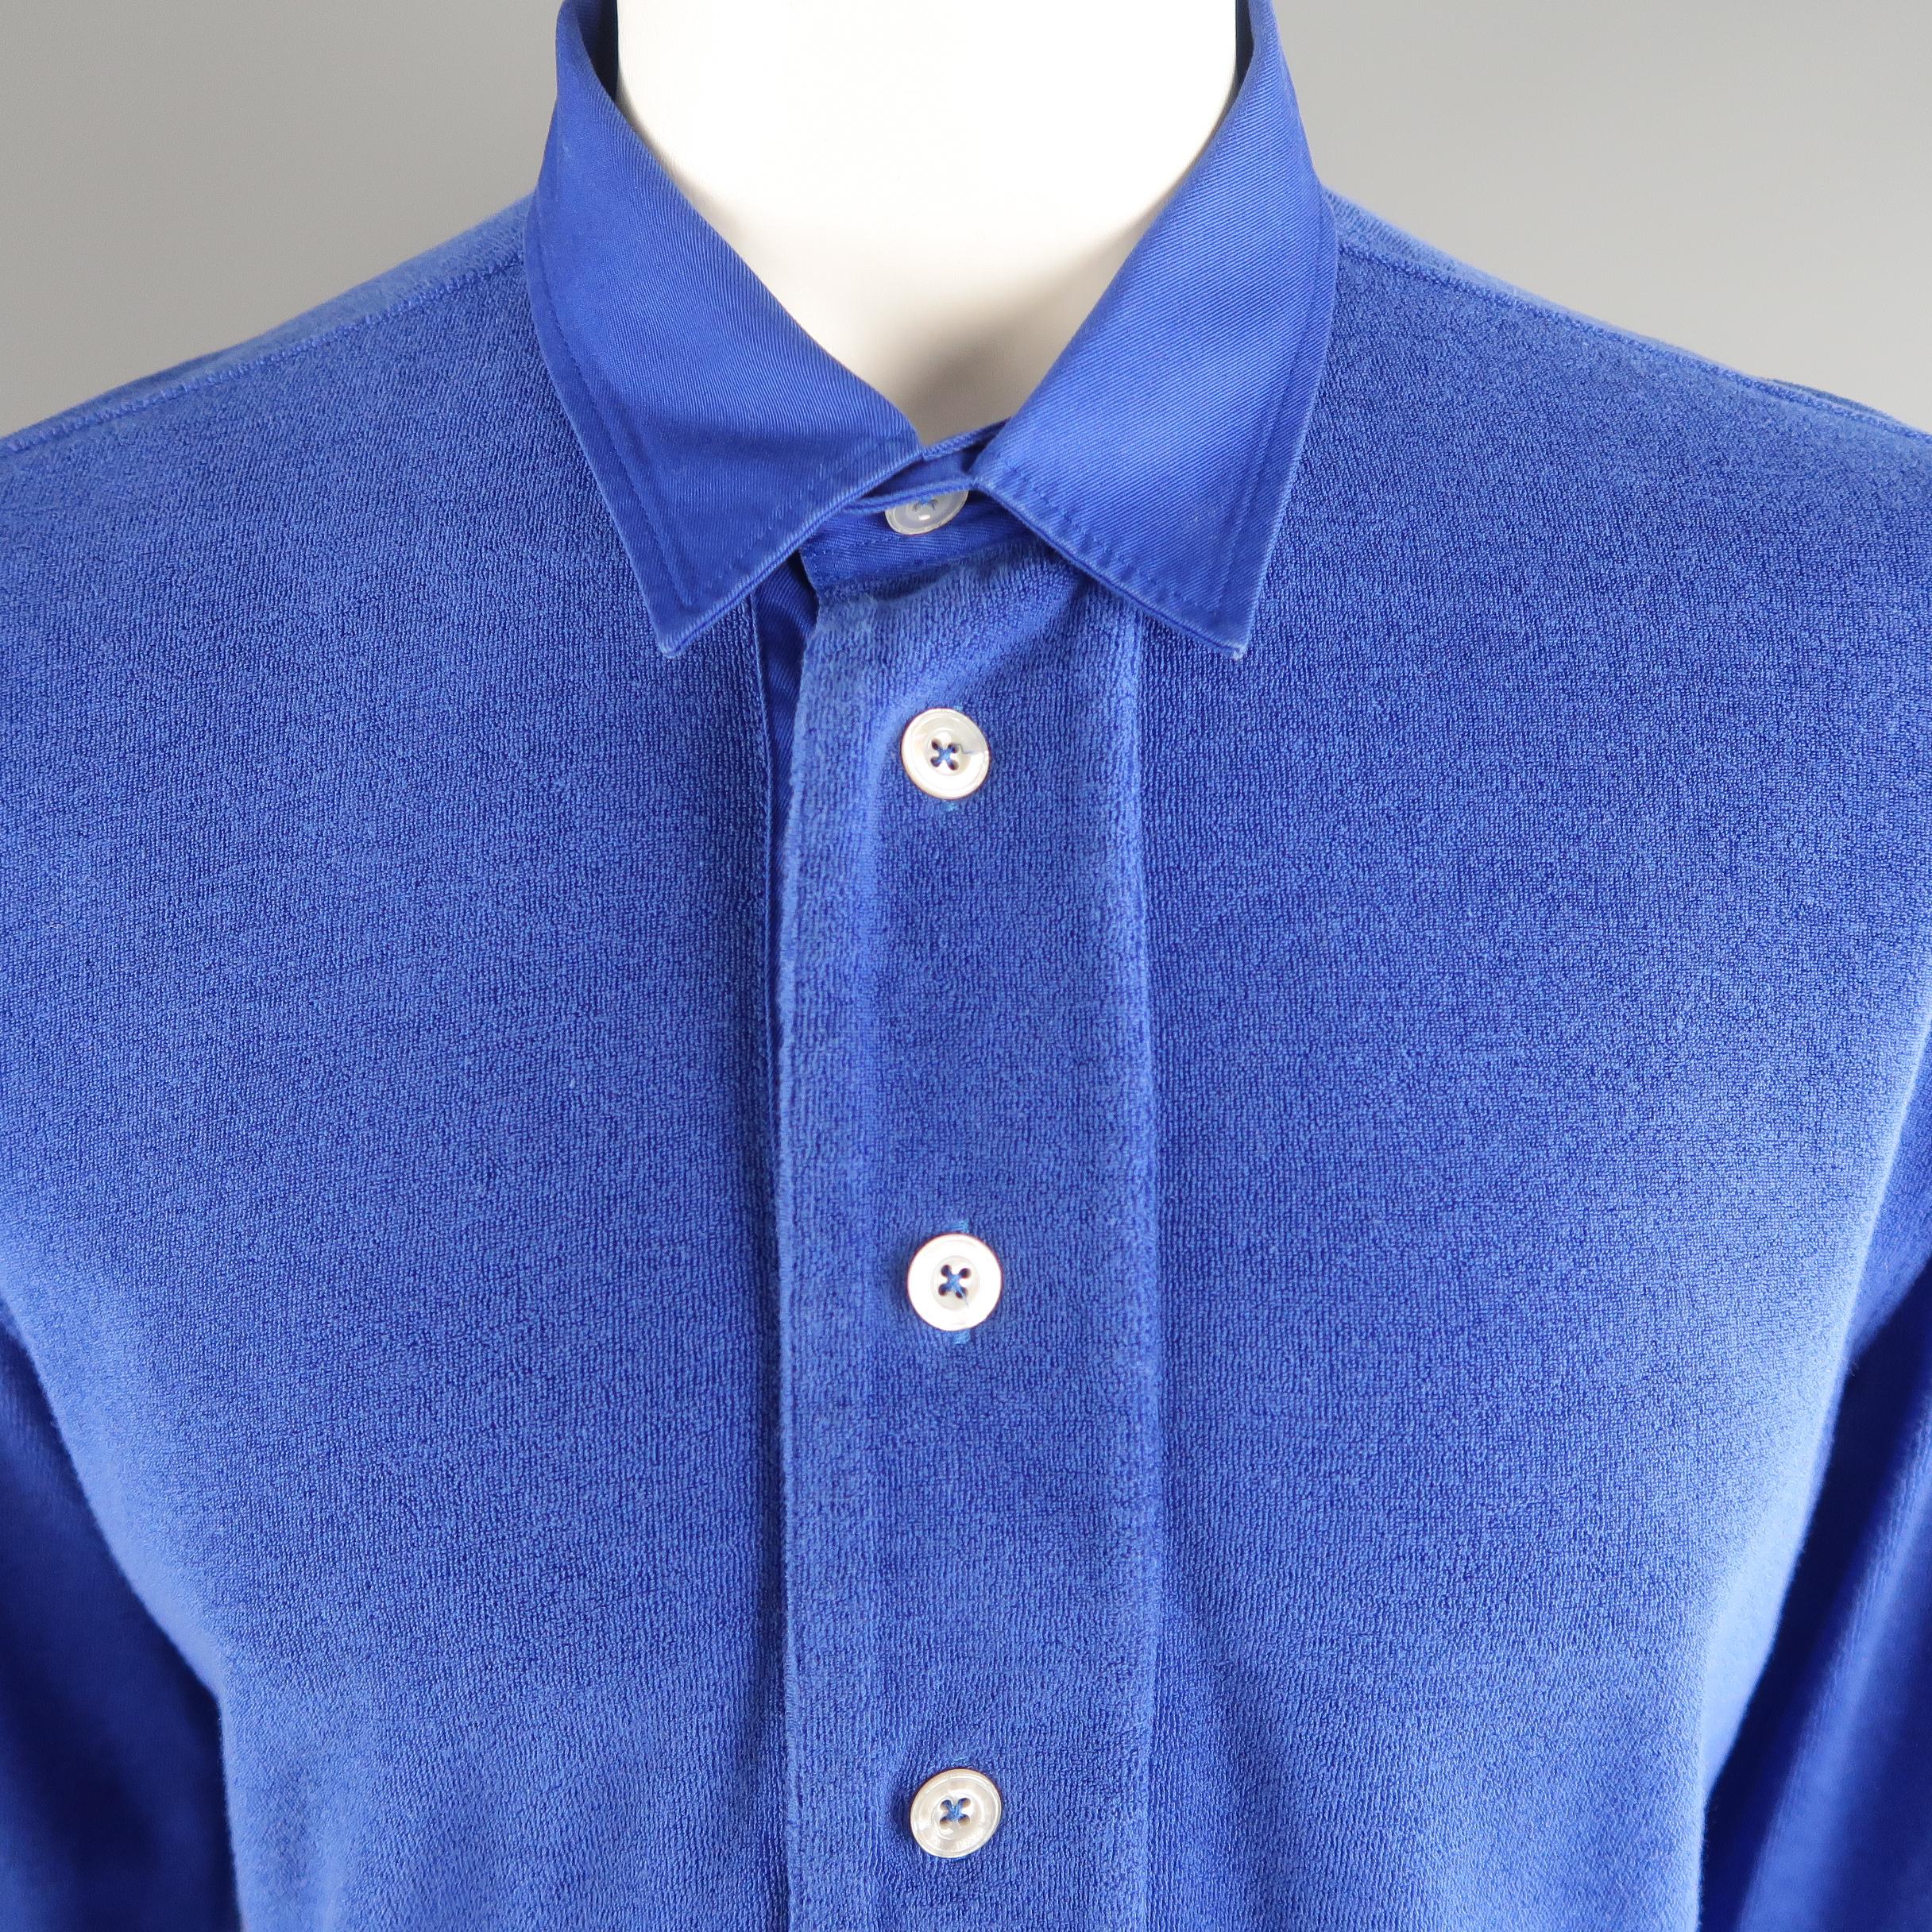 TOM FORD long sleeve POLO shirt comes in royal blue tone in terry material, half buttoned. Minor wear.  Made in Tunisia.
 
Good Pre-Owned Condition.
Marked: 54 IT
 
Measurements:
 
Shoulder: 18  in.
Chest: 46  in.
Sleeve: 28.5  in.
Length:  29  in.